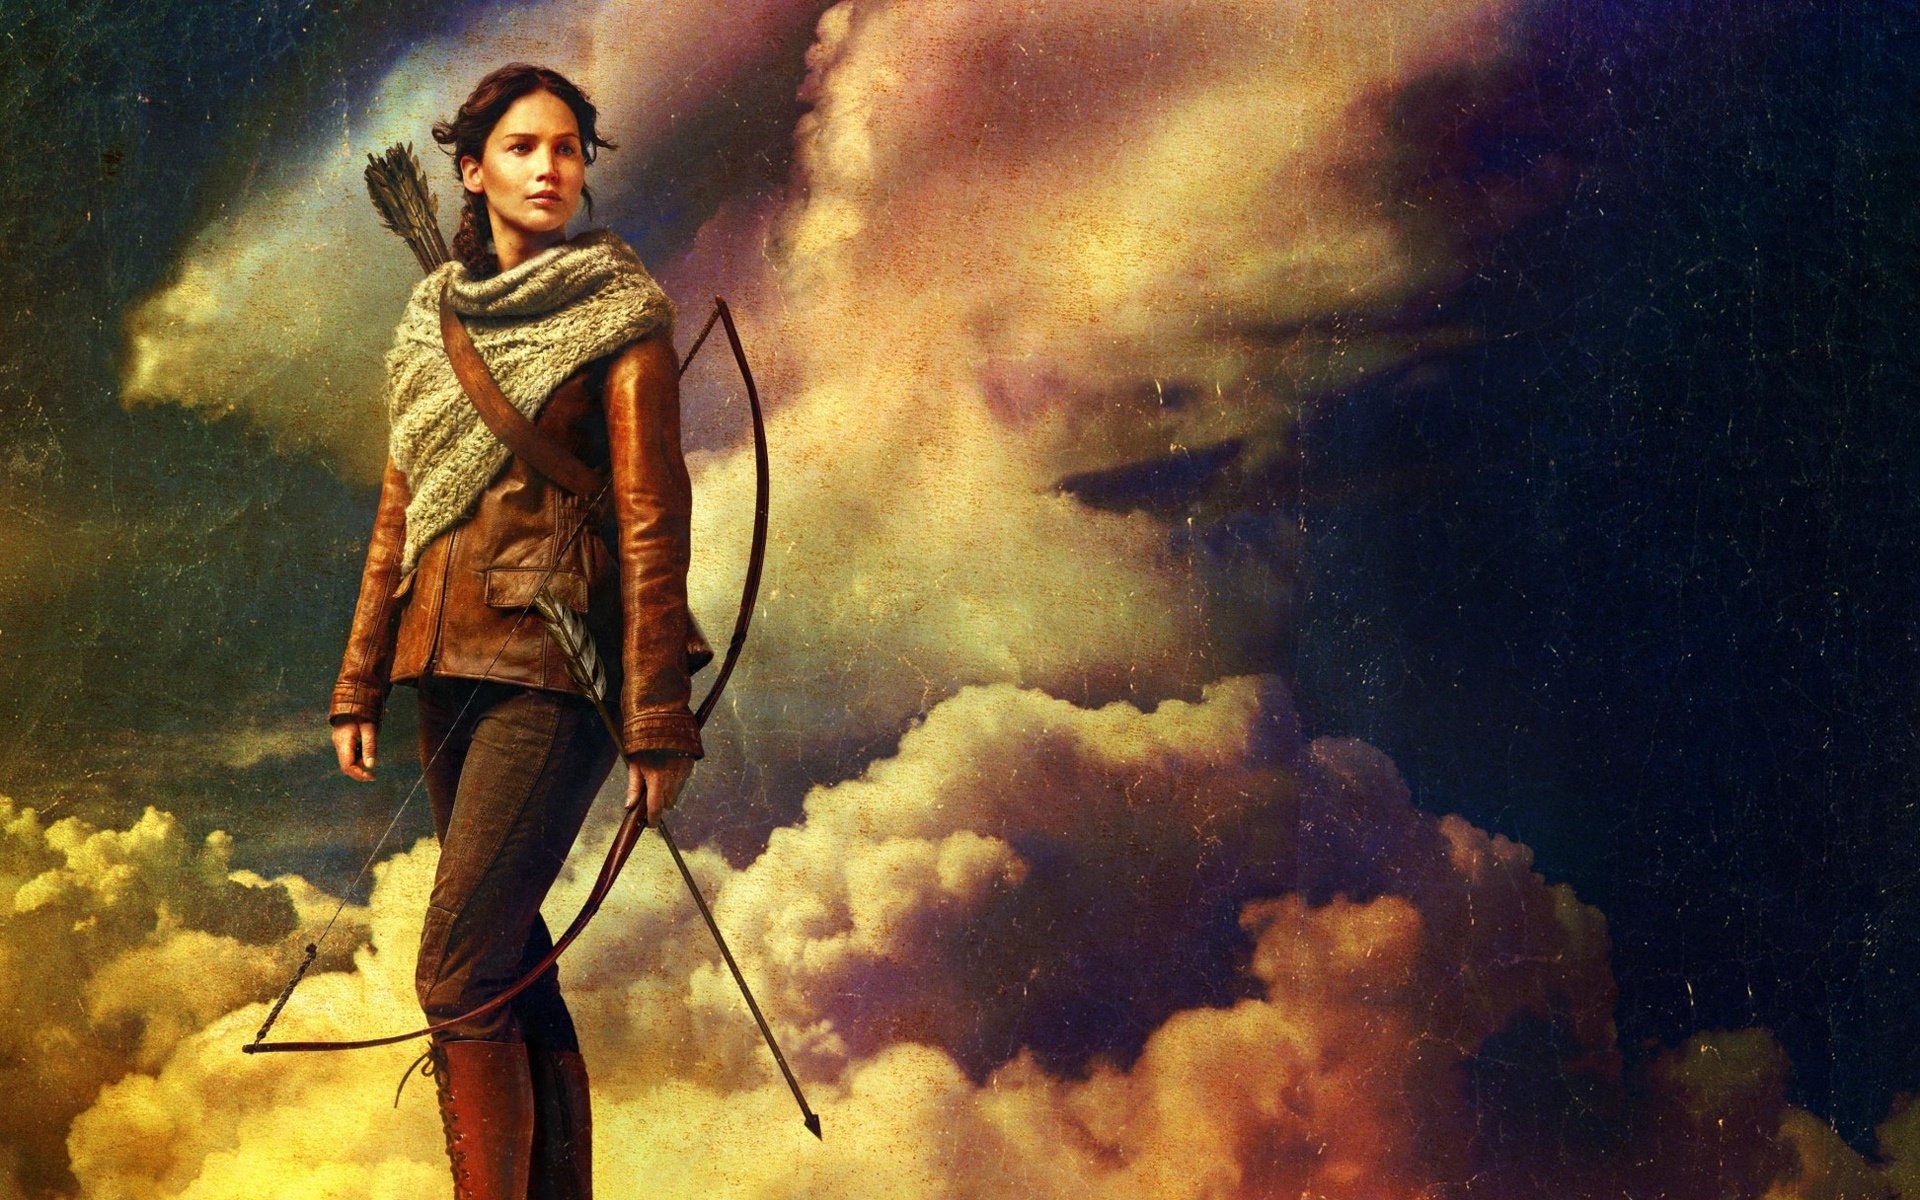 Download Crossbow The Hunger Games Movie The Hunger Games: Catching Fire  HD Wallpaper